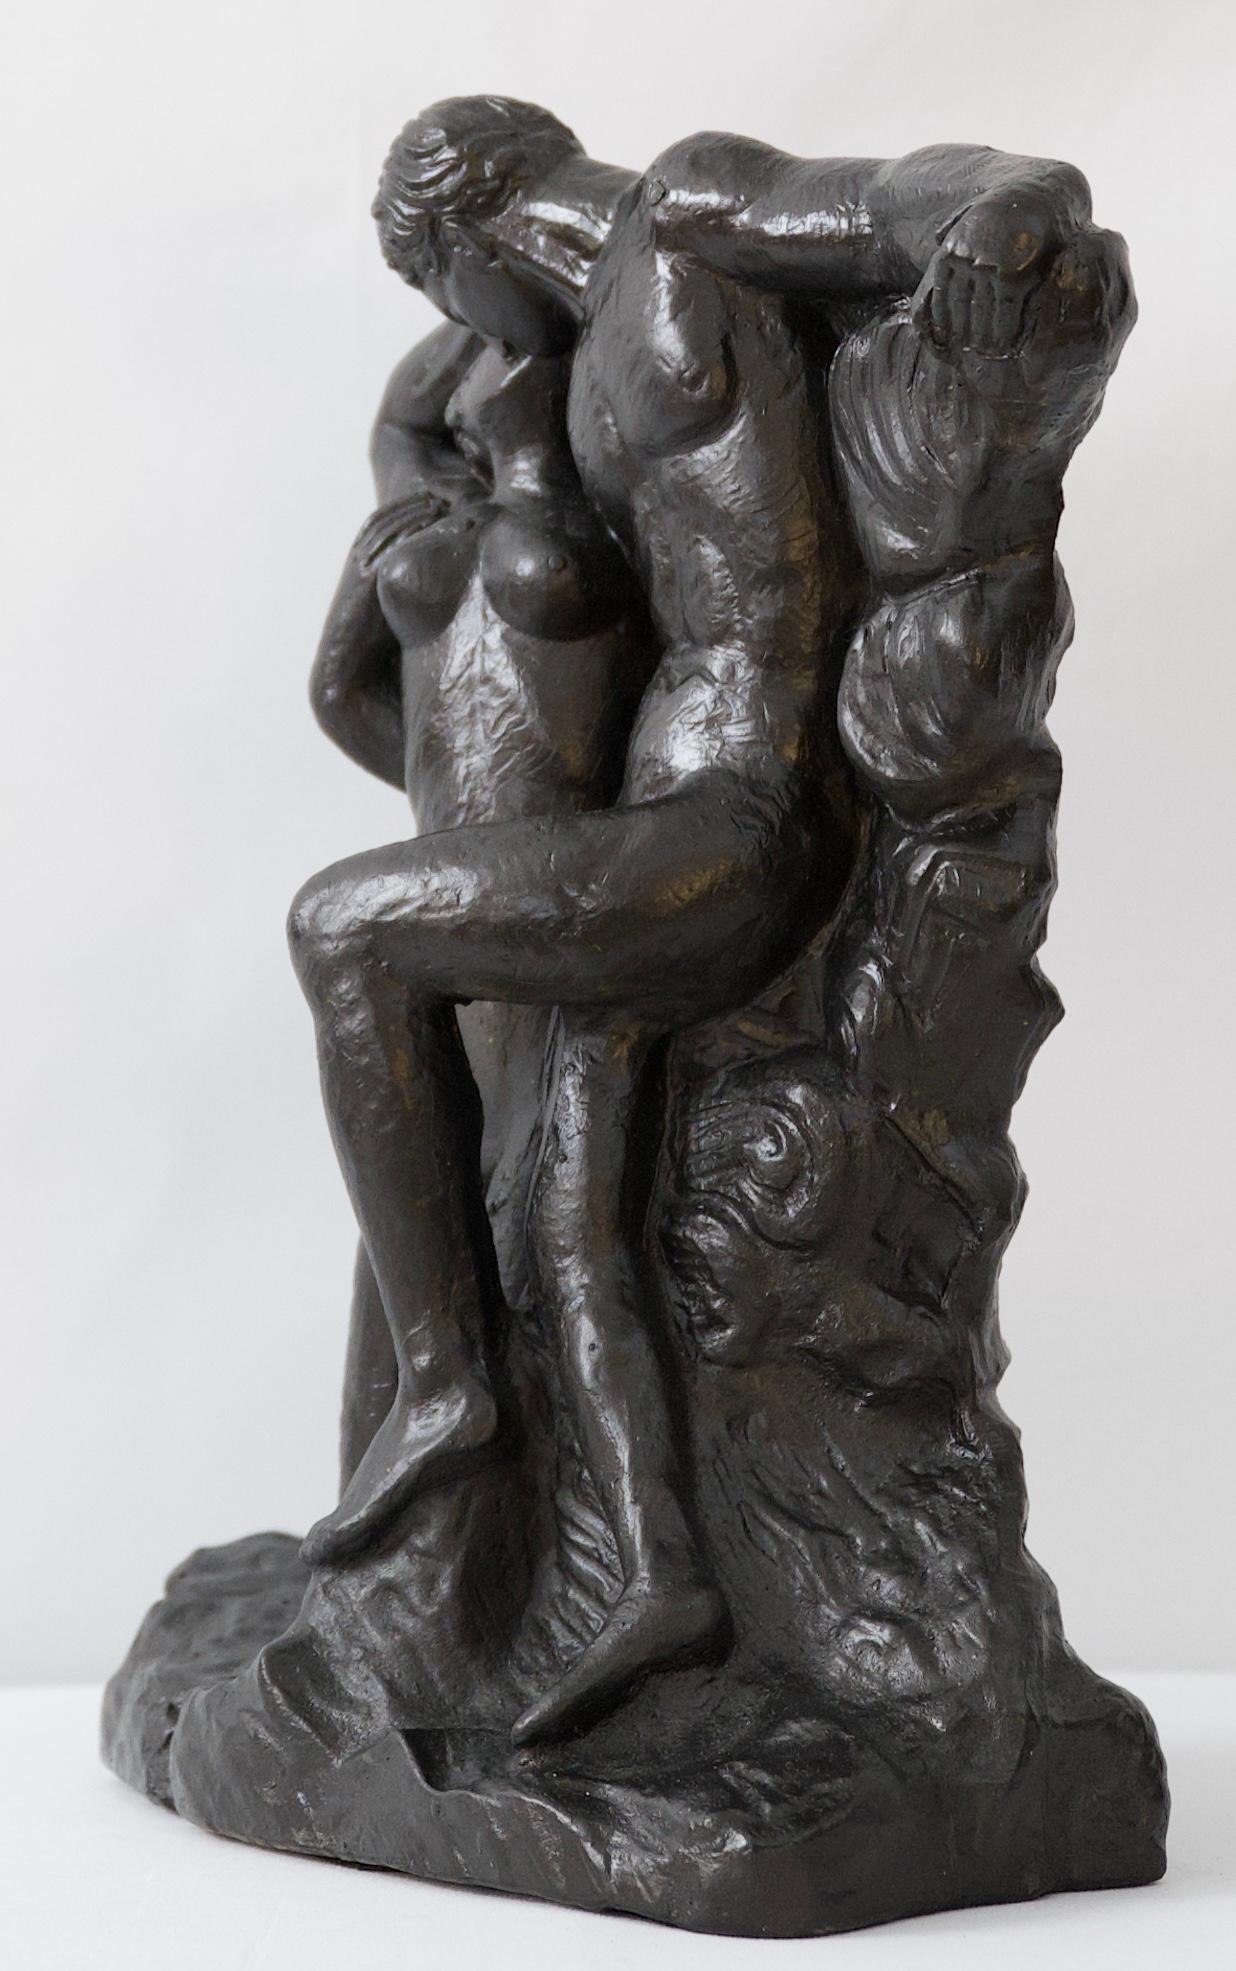 An eye-catching figurative sculpture of a kissing couple in the style of Henry Moore. 

This piece is made from hand-cast and hand-finished Durastone, which is a special formulation of crushed stone mixed with slurry. It has a beautiful